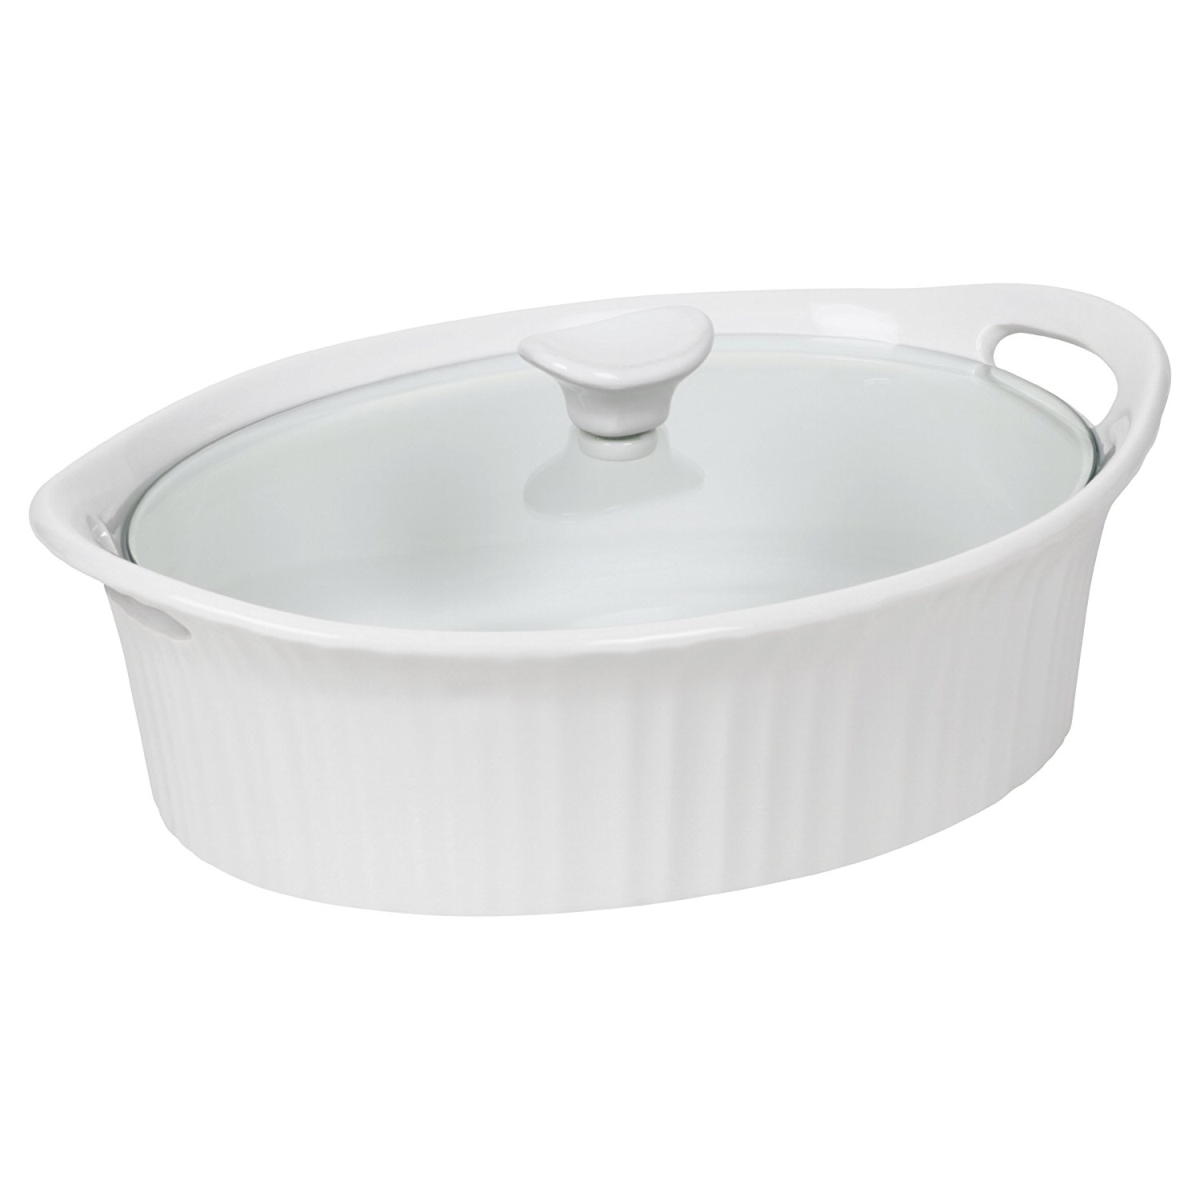 2.5 Qt French White Iii Oval Casserole With Glass Cover - Medium